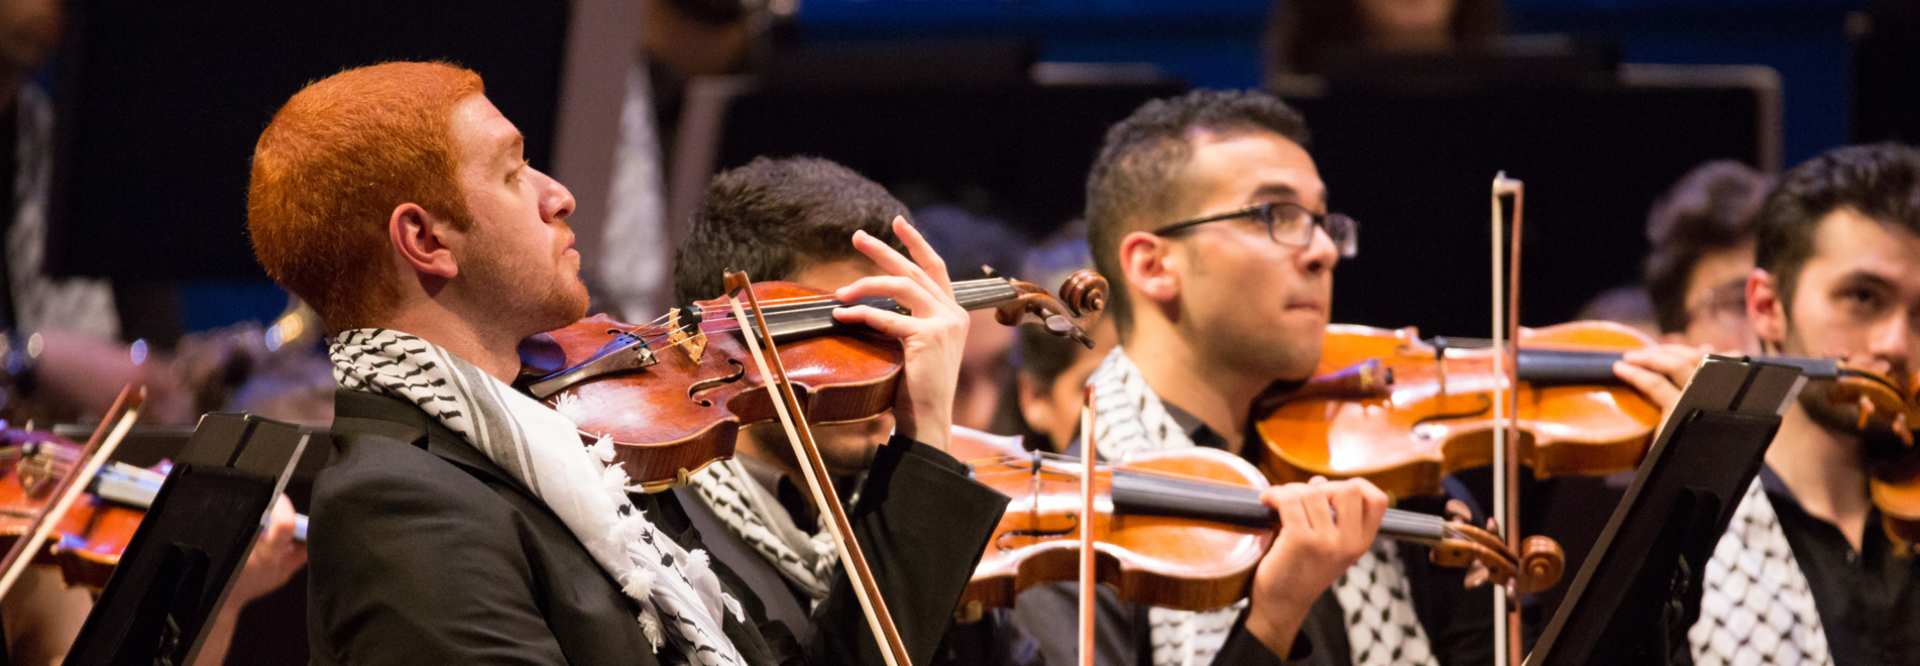 Save the Date: The Palestinian Youth Orchestra is coming to the Netherlands!